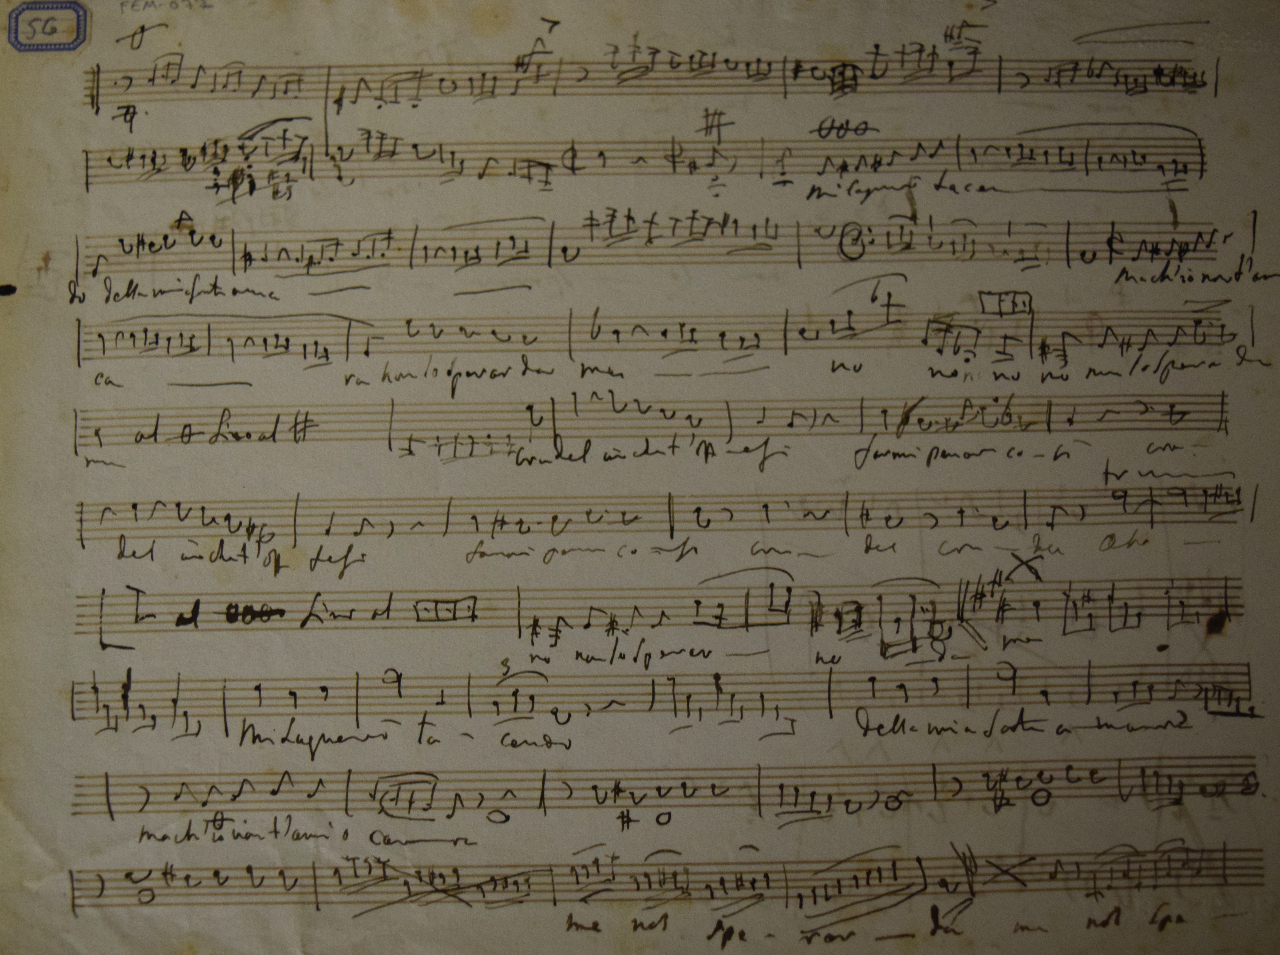 'Mi lagnerò tacendo', or 'I will complain in silence'. One of the many versions that Rossini composed on the text of Pietro Metastasio (1898-1782). The first volume of 1857 of the 'Péchés de vieillesse' contains six different settings on the same text, but he also wrote other versions too. This autograph sketch has the vocals and the bass line only. There are hardly any corrections in the text which make it seem as if Rossini wrote down his music very easily. FEM-077